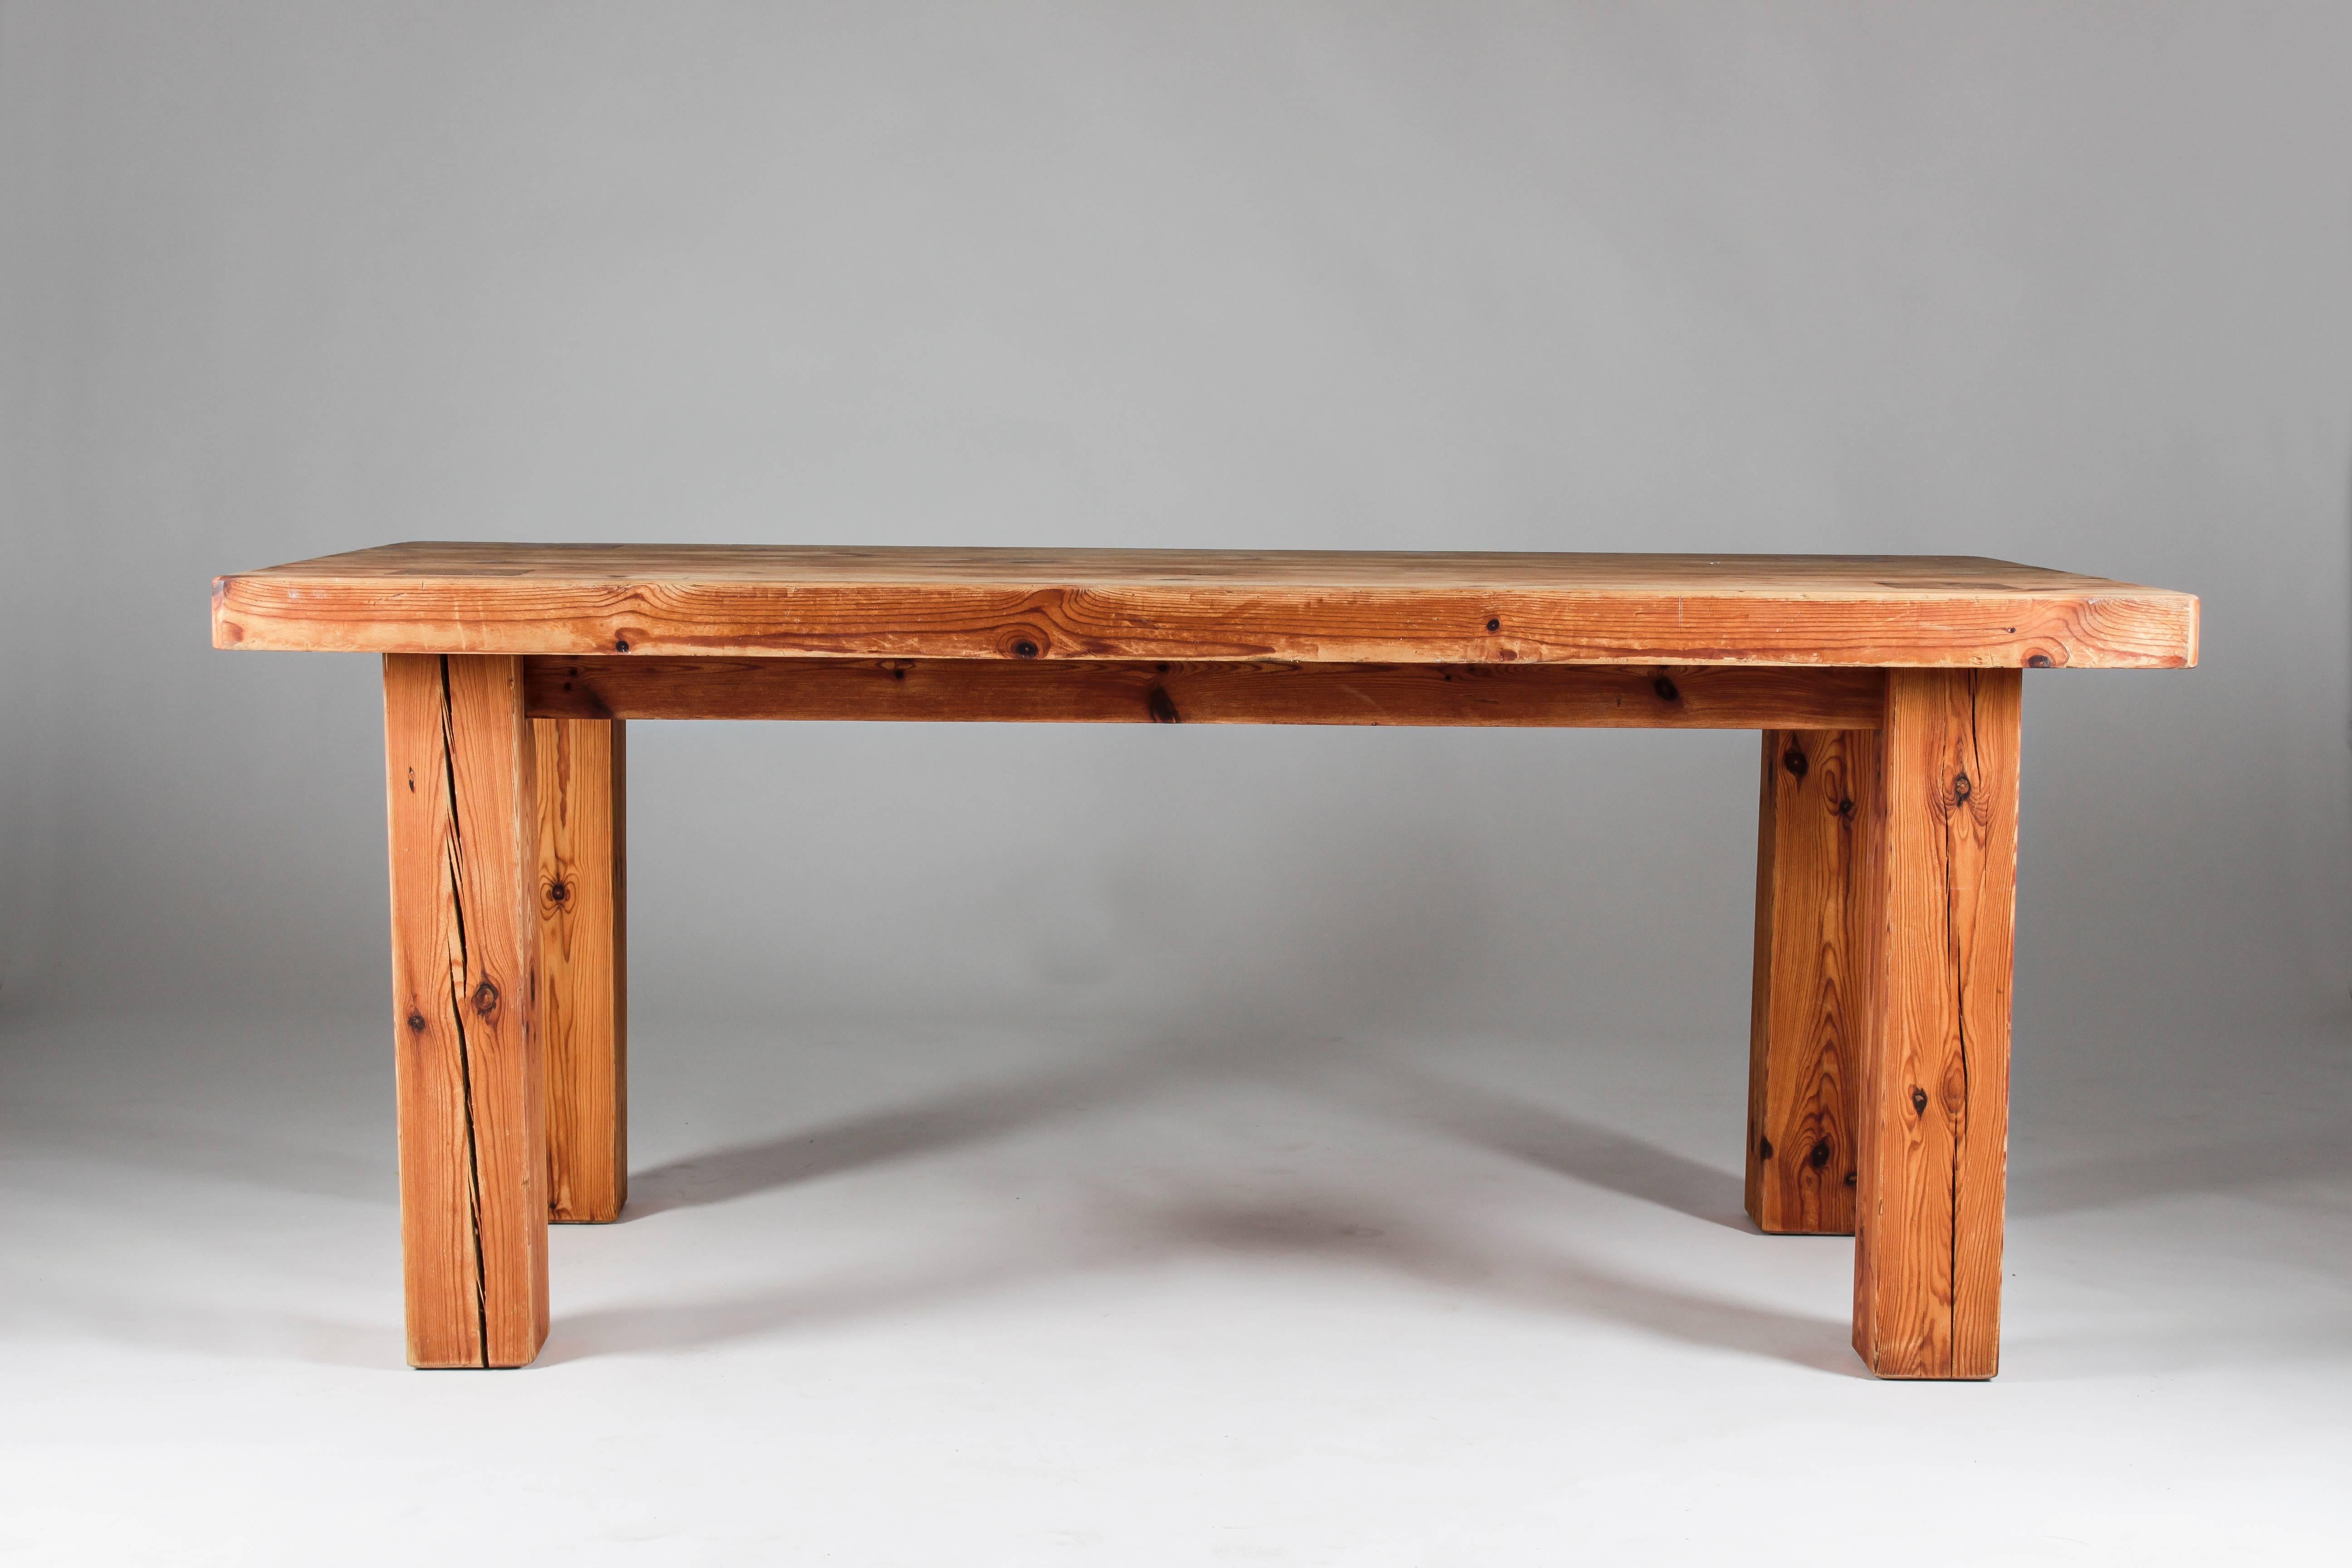 Very heavy table in pine, brutal and elegant at the same time, with its legs beautifully coming through the table top. This is probably a one of a kind table. The text under the table top says 